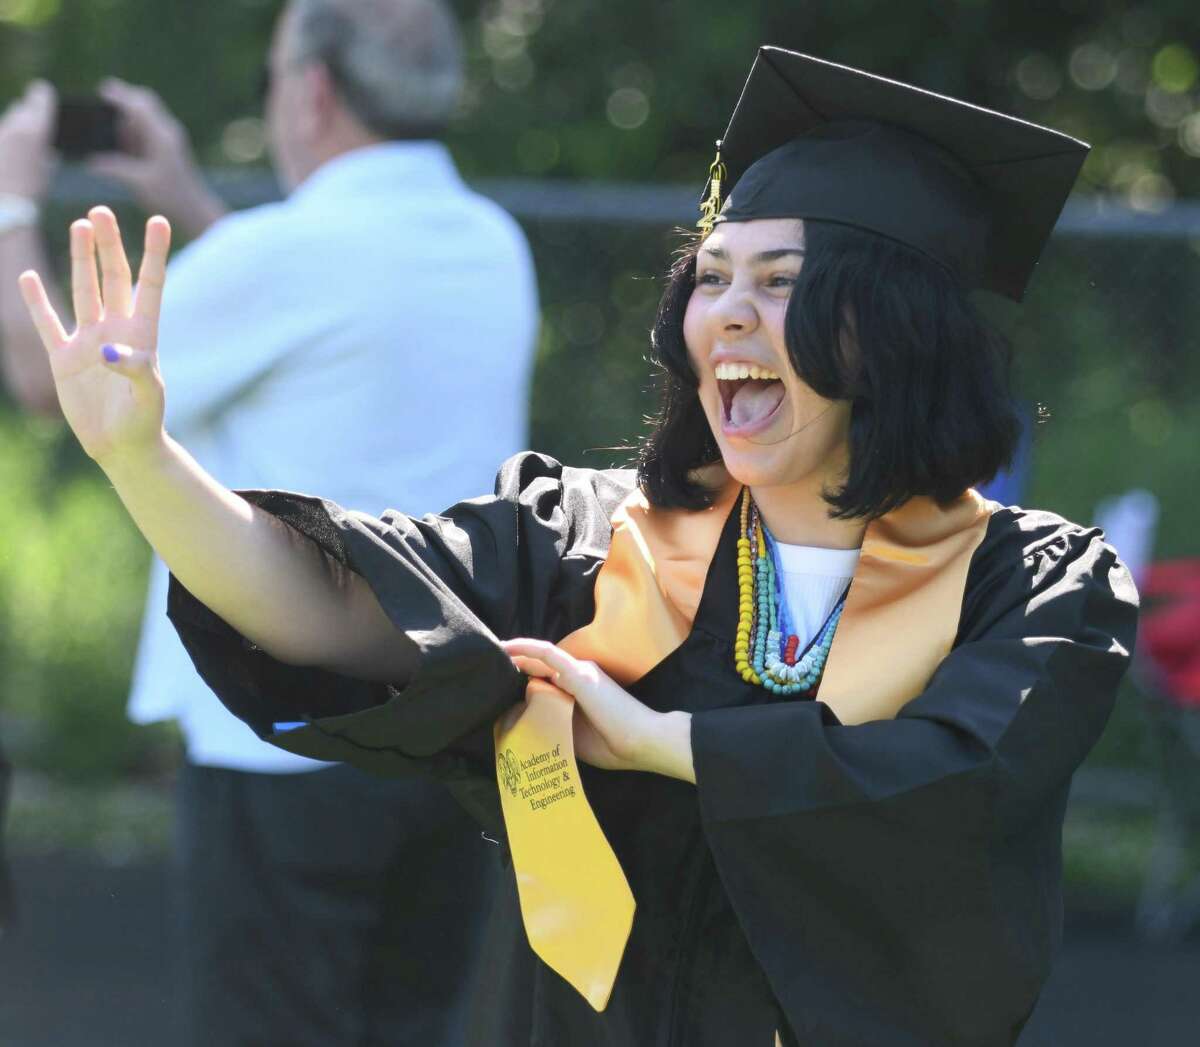 Graduating senior Evyn Christiansen waves to her family during the processional at the 2022 commencement ceremony at Academy of Information Technology & Engineering magnet high school in Stamford, Conn. Monday, June 20, 2022.